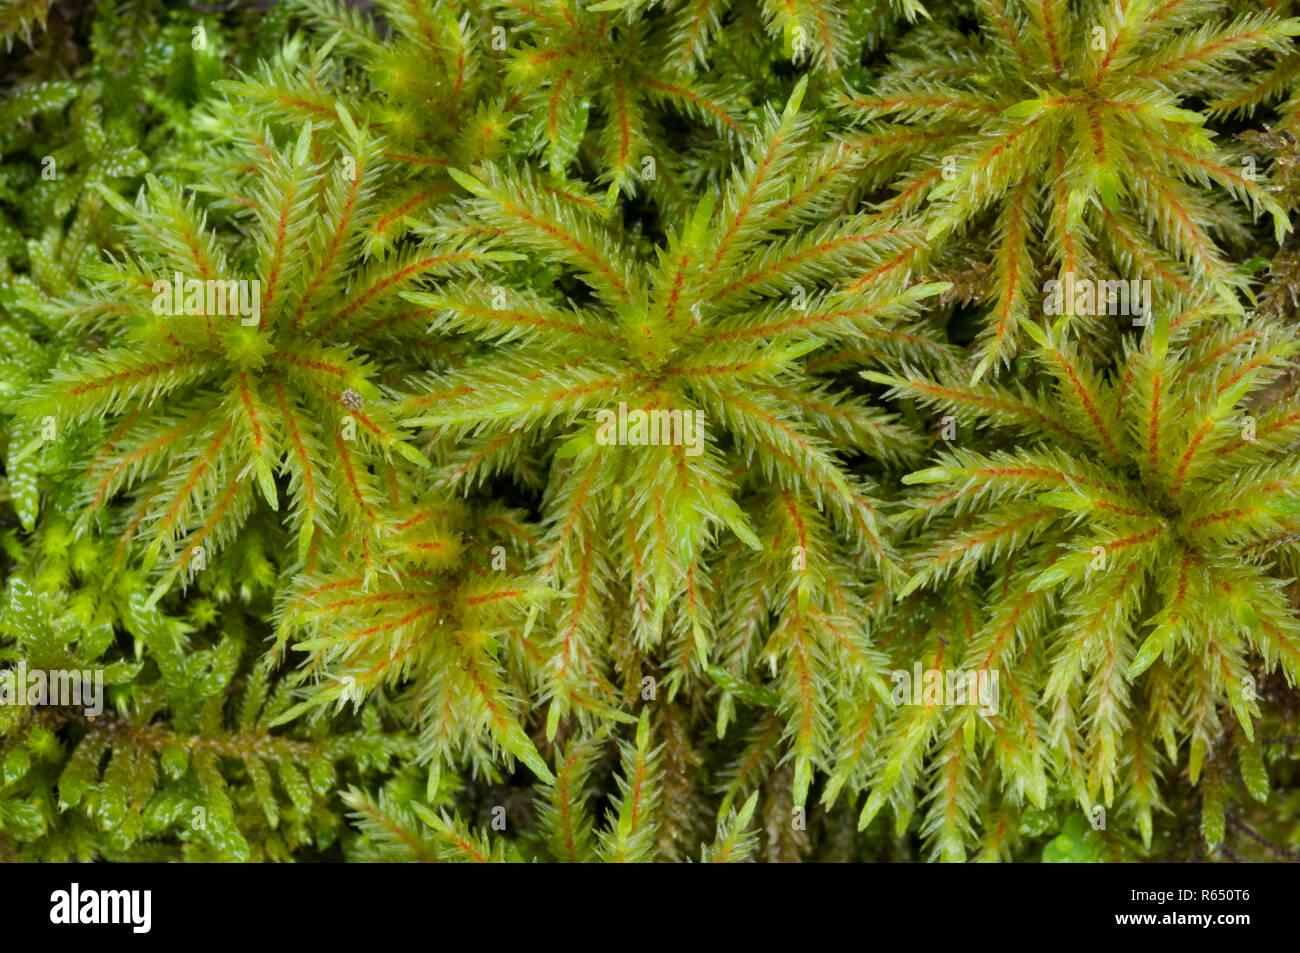 tree-moss-climacium-dendroides-growing-on-a-rotting-tree-stump-in-the-white-peak-peak-district-national-park-emgland-R650T6.jpg